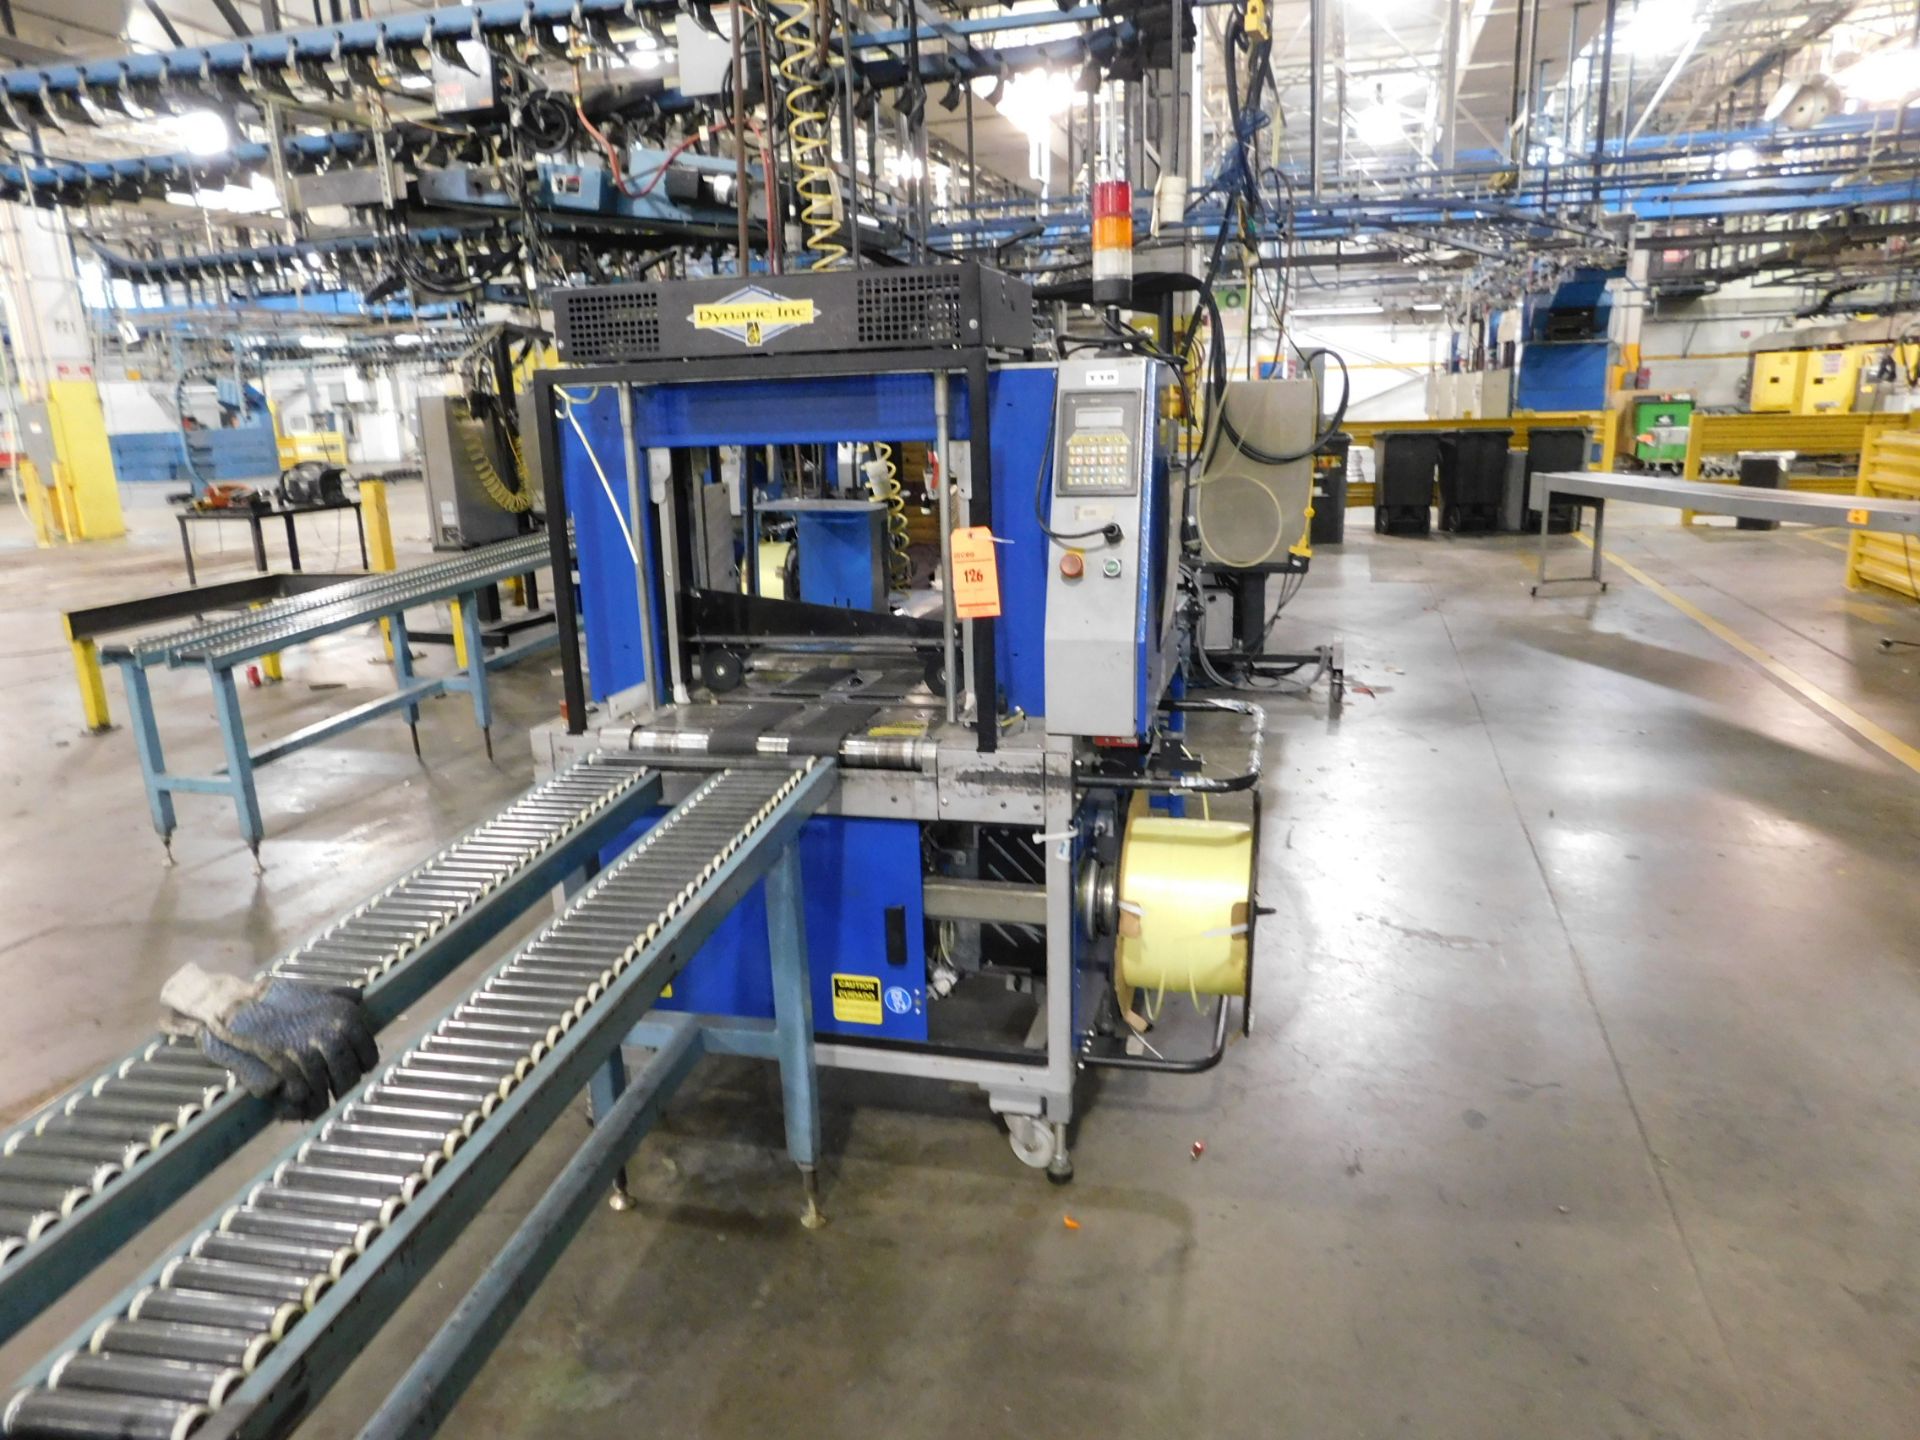 2002 Dynark banding machine with discharge roller conveyor, 10 ft. long by 18 in. wide, asset # T18,